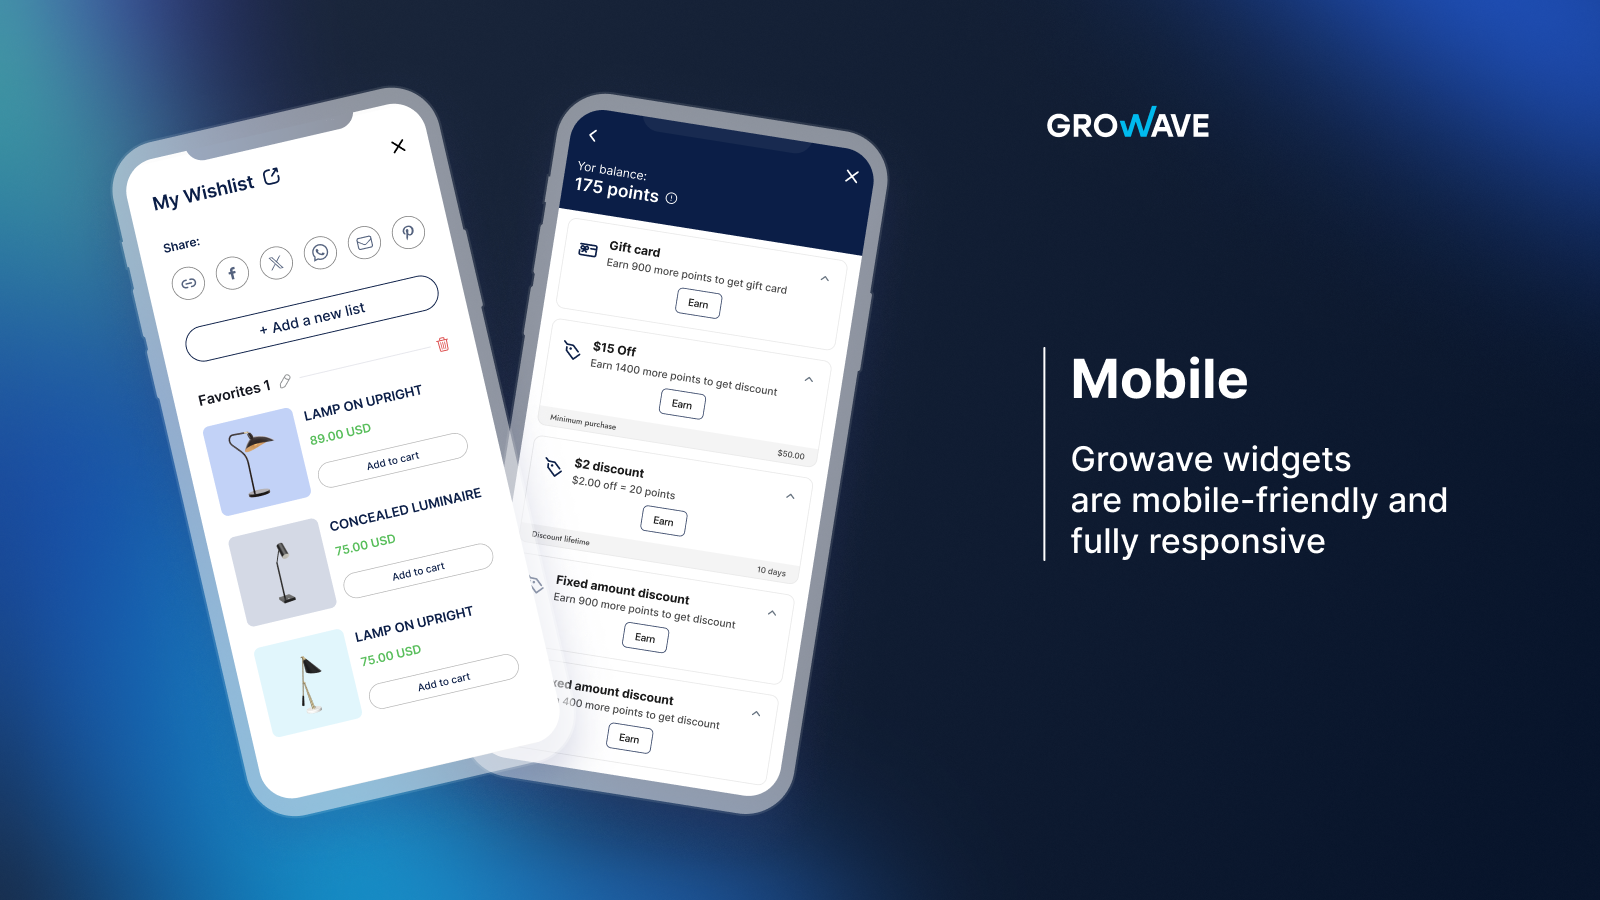 Growave widgets are mobile-friendly and fully responsive